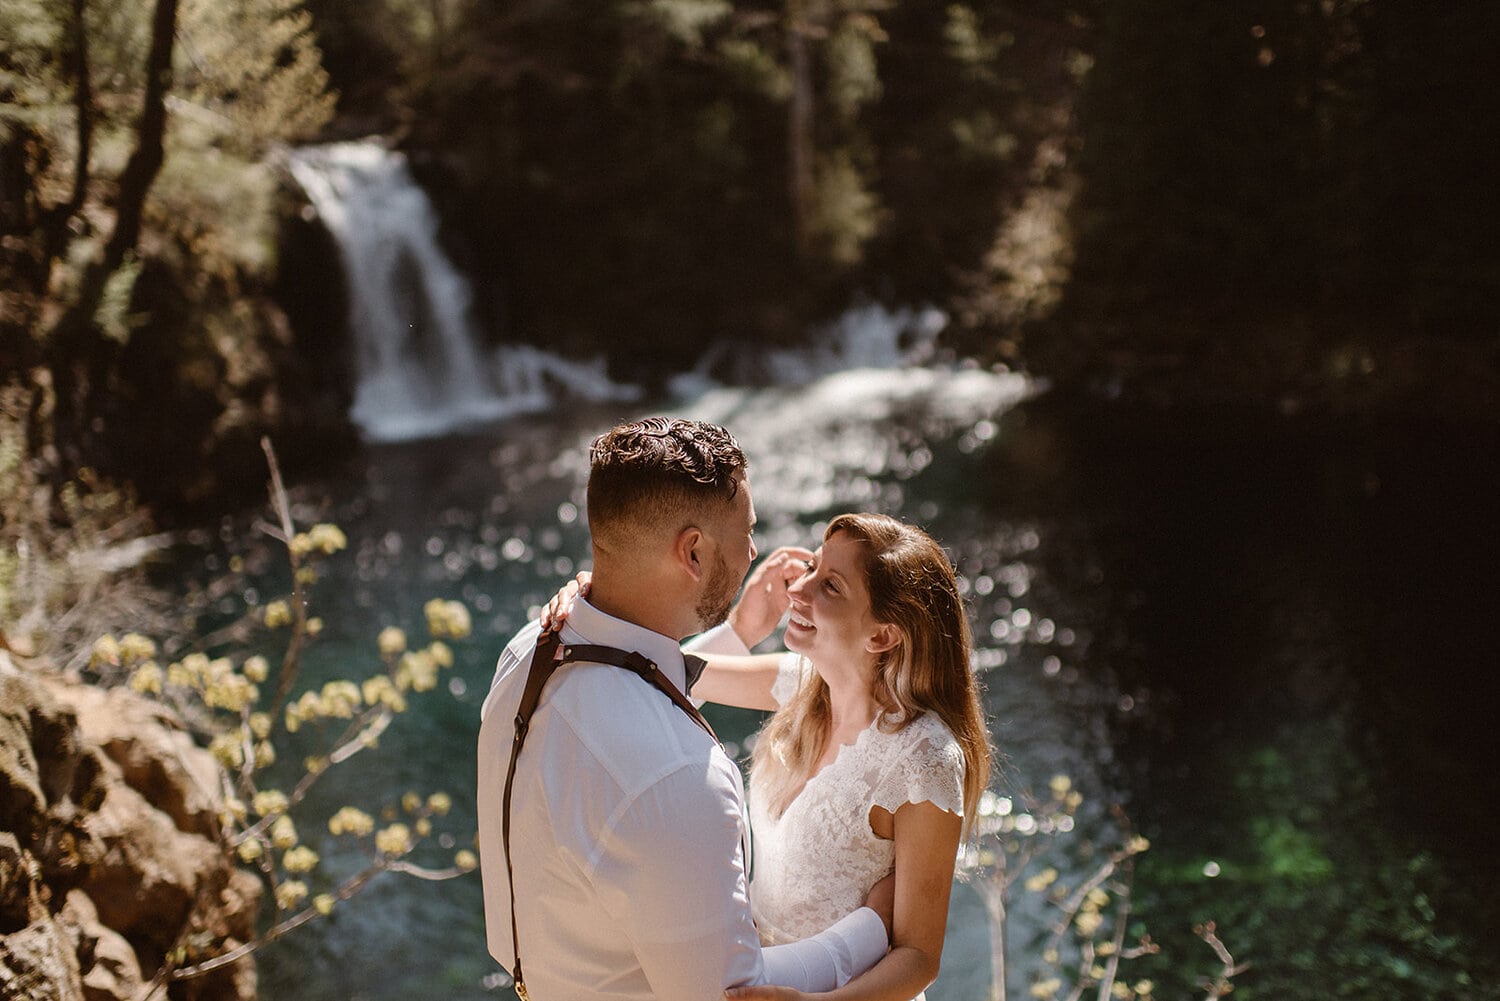 A bride and groom smile at each other while standing in front of an Oregon waterfall.